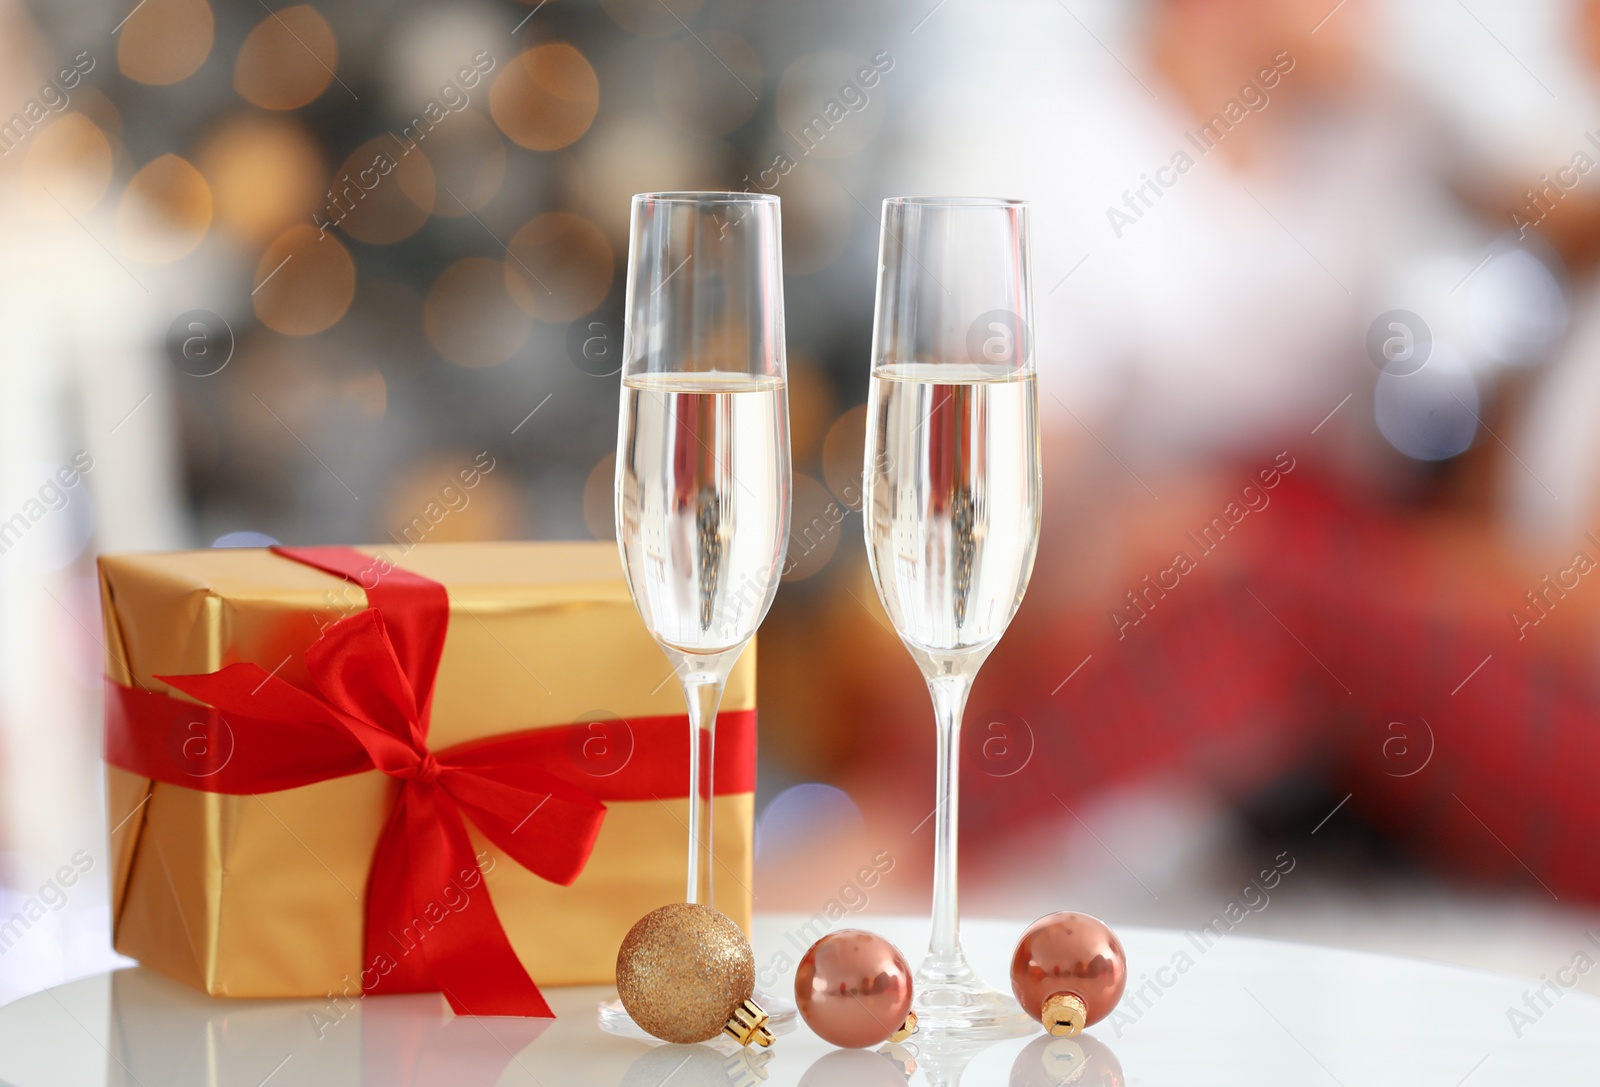 Photo of Christmas gift and glasses of champagne on table against blurred background